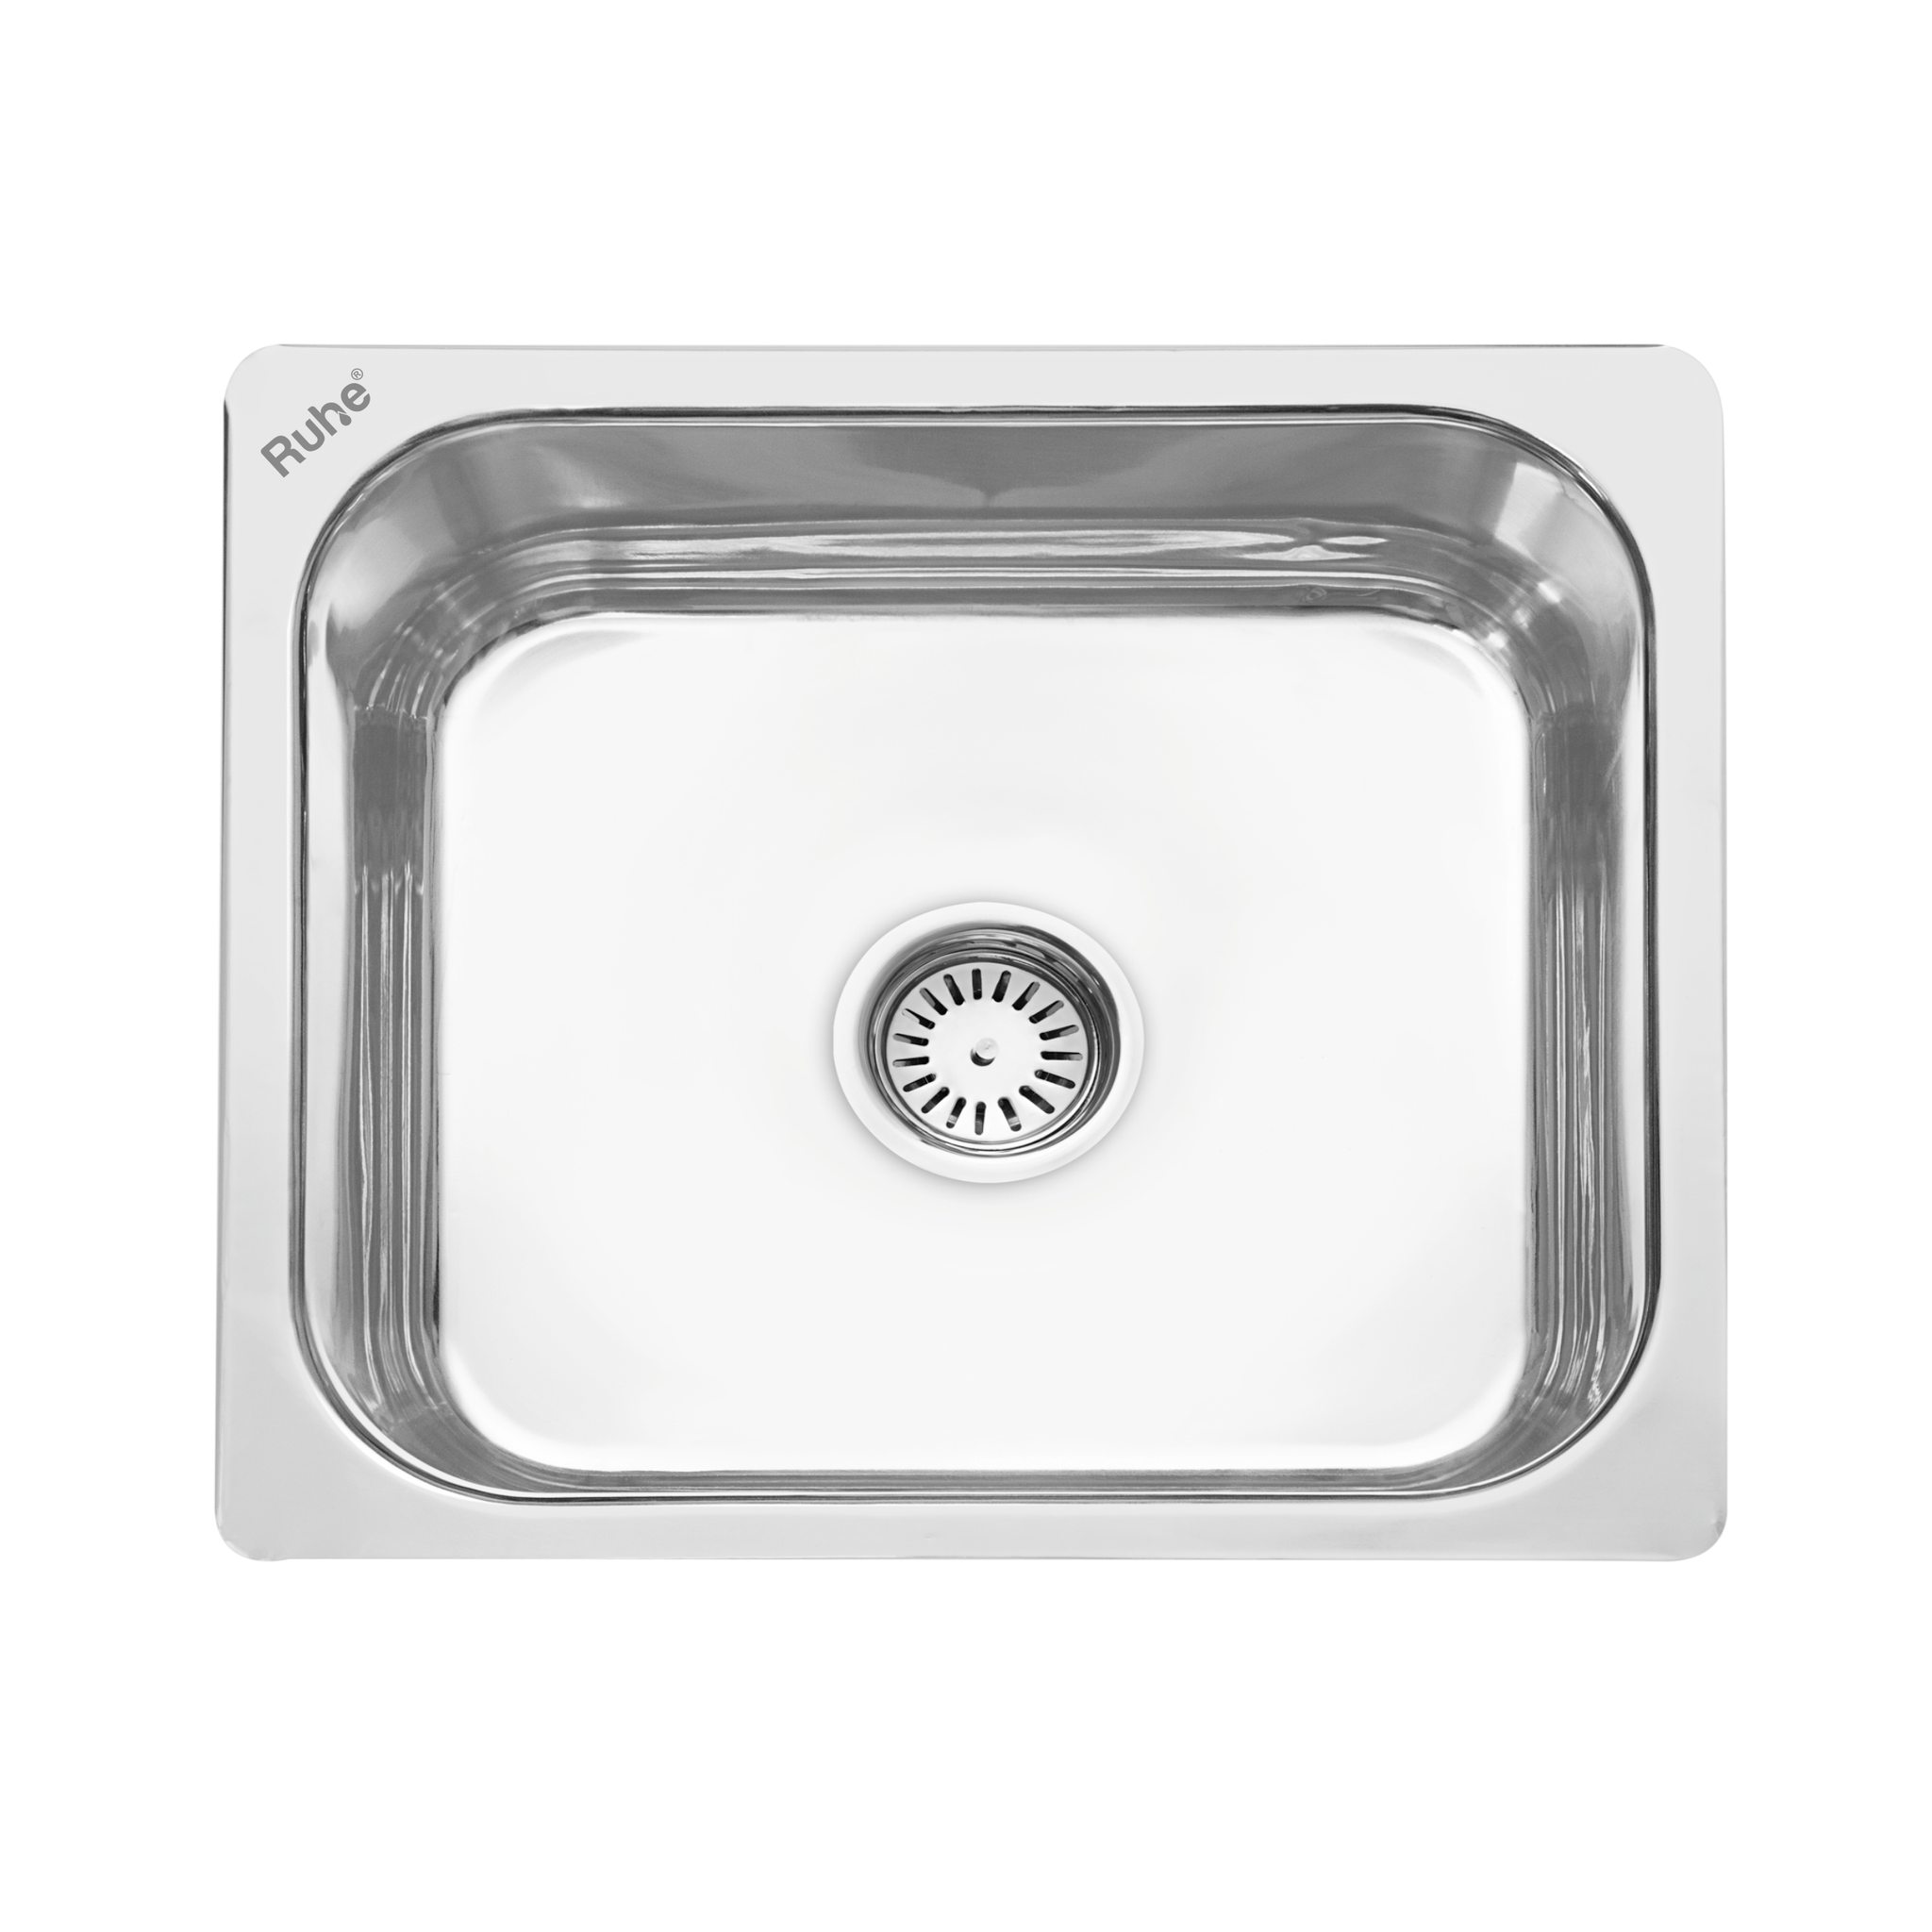 Square Single Bowl Kitchen Sink (22  x 18 x 8 inches) – by Ruhe®